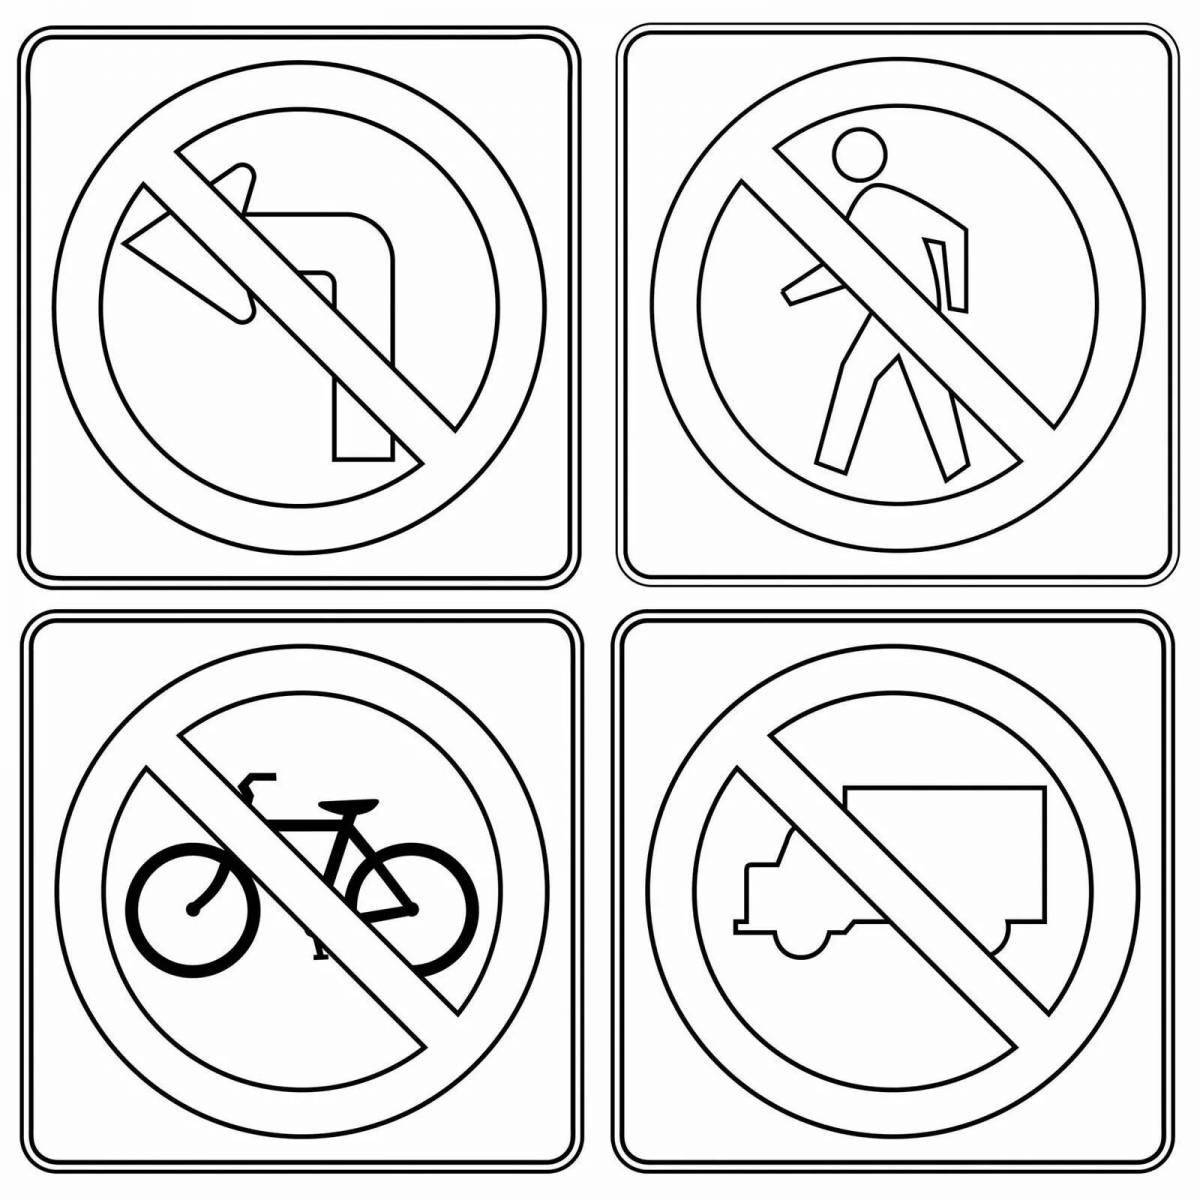 Funny road signs coloring page for kids